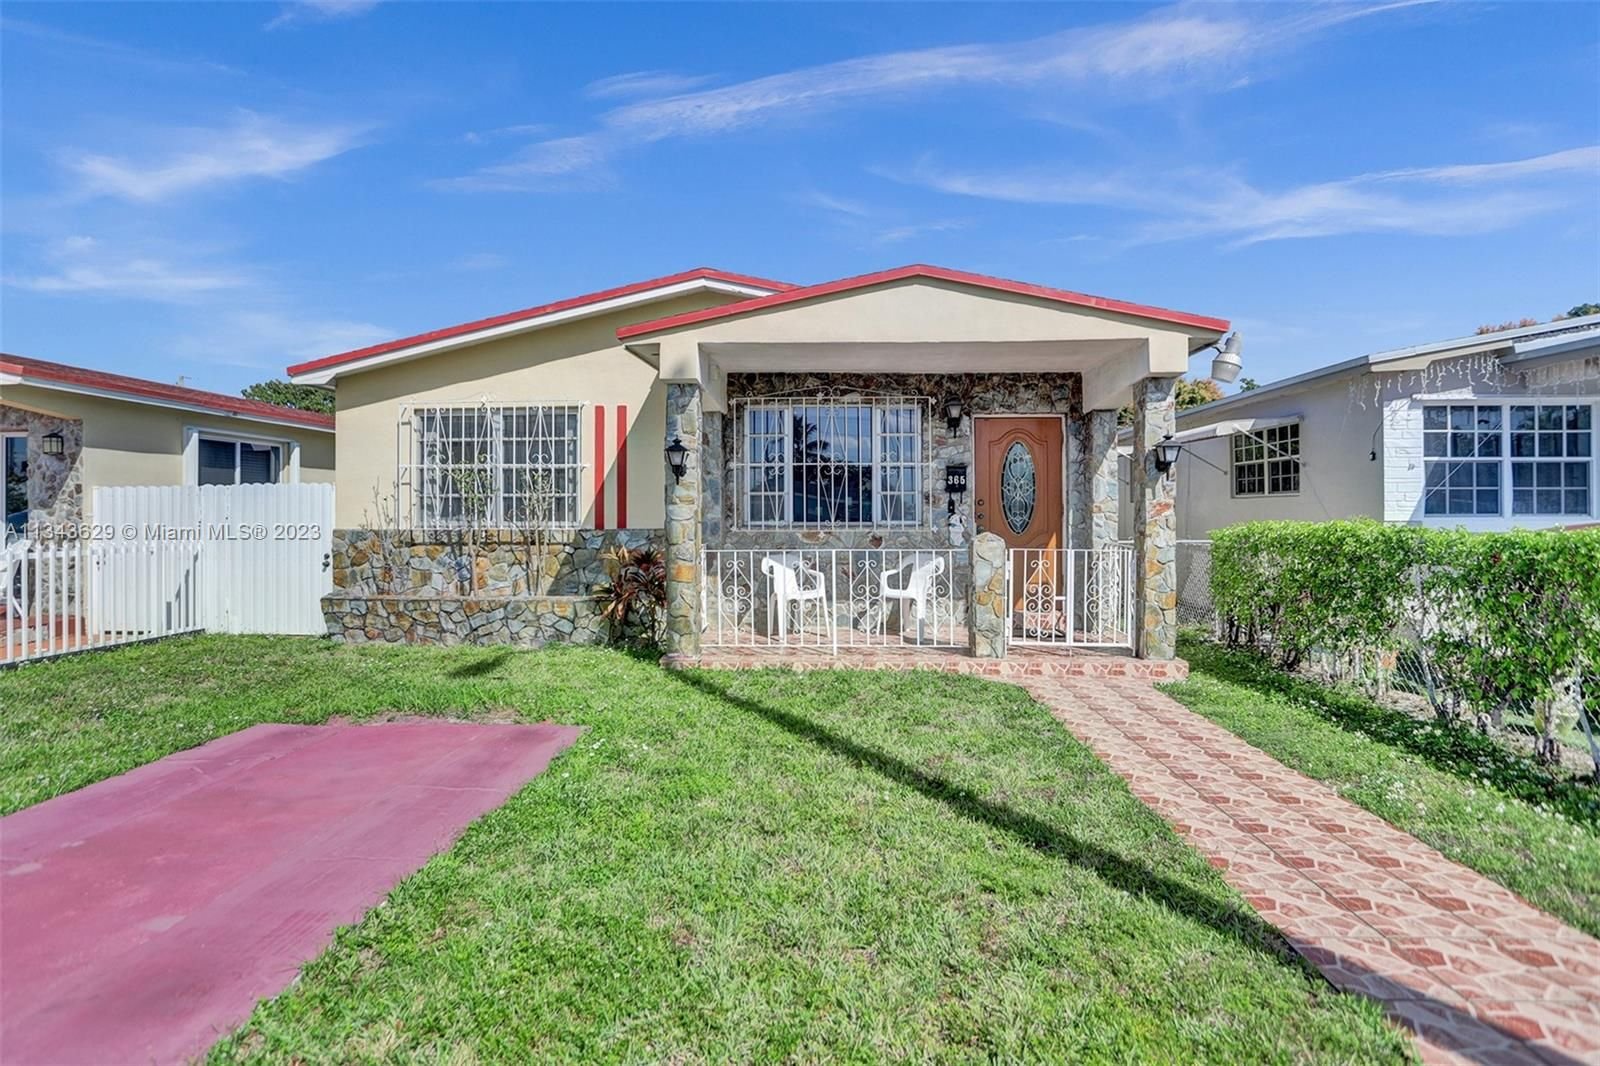 Real estate property located at 365 30th St, Miami-Dade County, Hialeah, FL